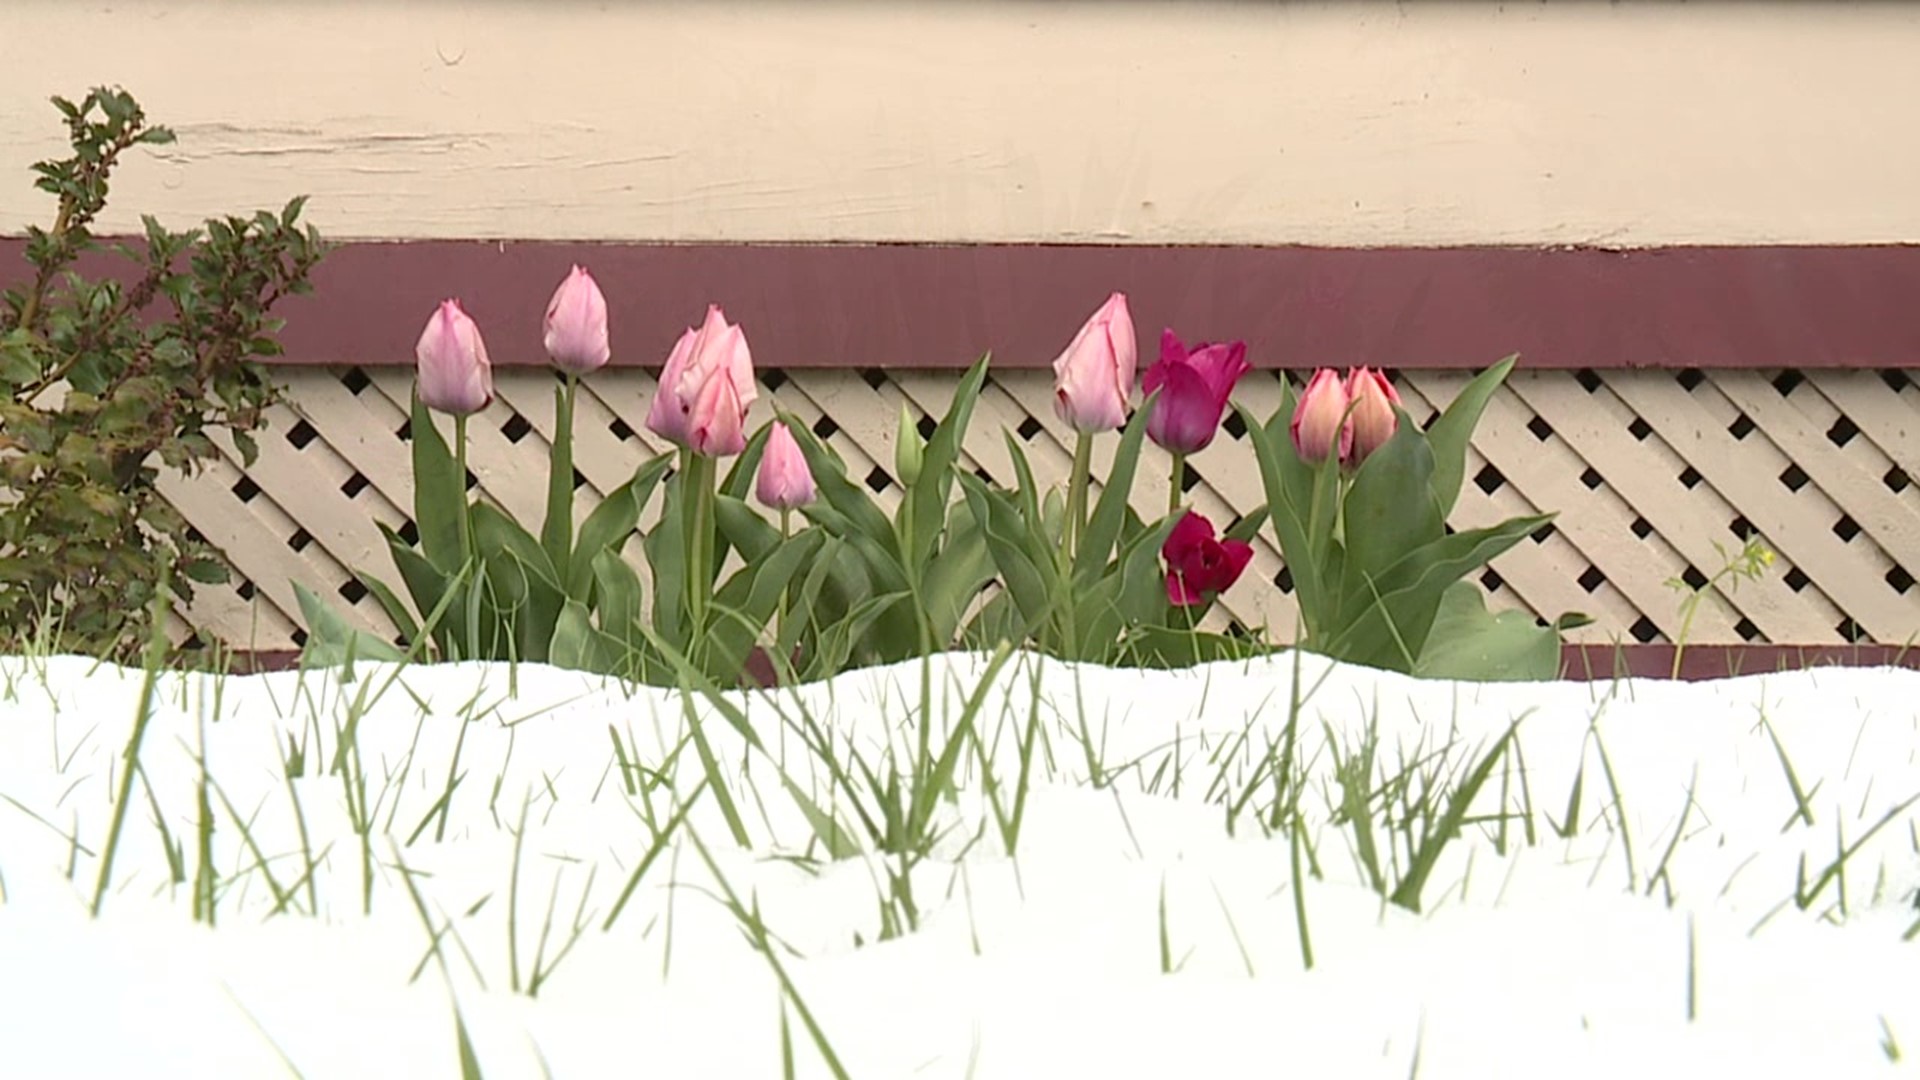 Jon Meyer found plenty of evidence that spring is here, even when it's buried in a blanket of white.